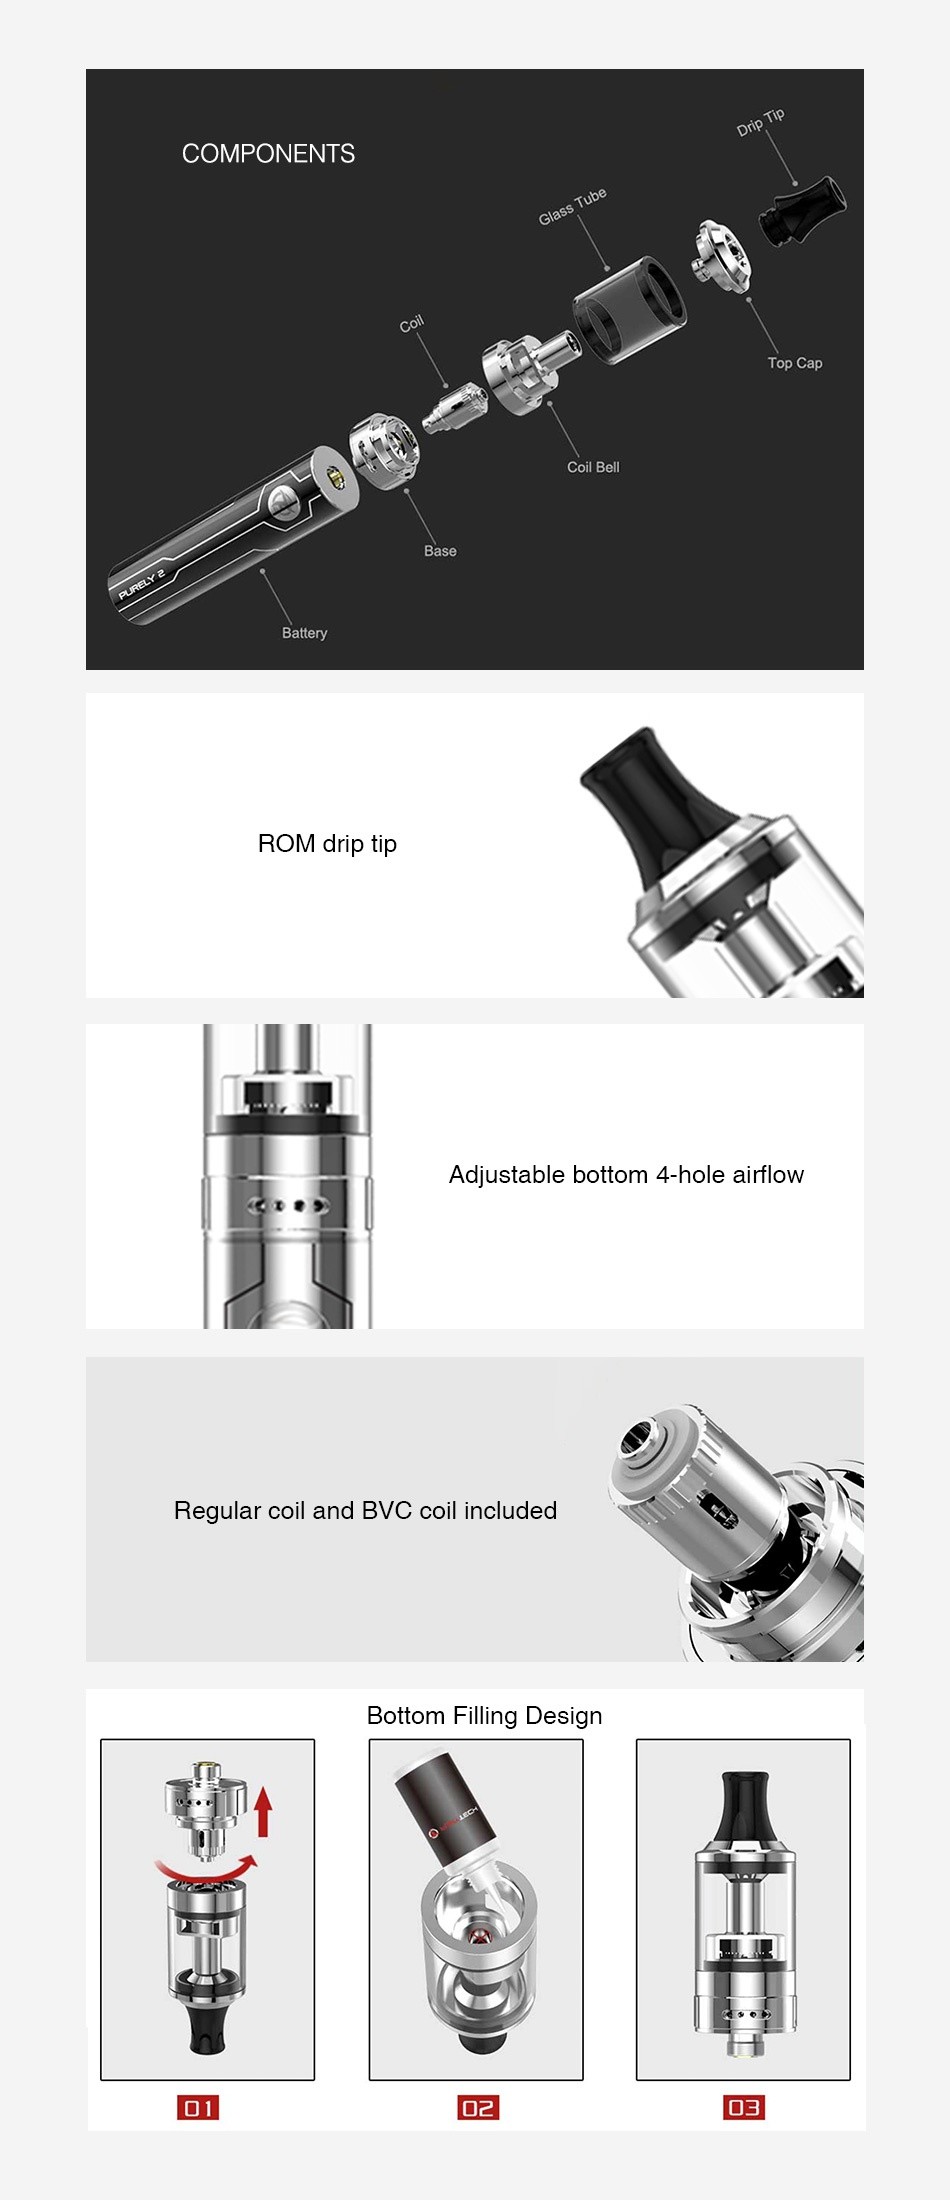 [With Warnings] Fumytech Purely 2 Plus Starter Kit 1600mAh COMPONENTS Battery ROM drip tip Adjustable bottom 4 hole airflow Regular coil and Bvc coil included Bottom Filling Design  3